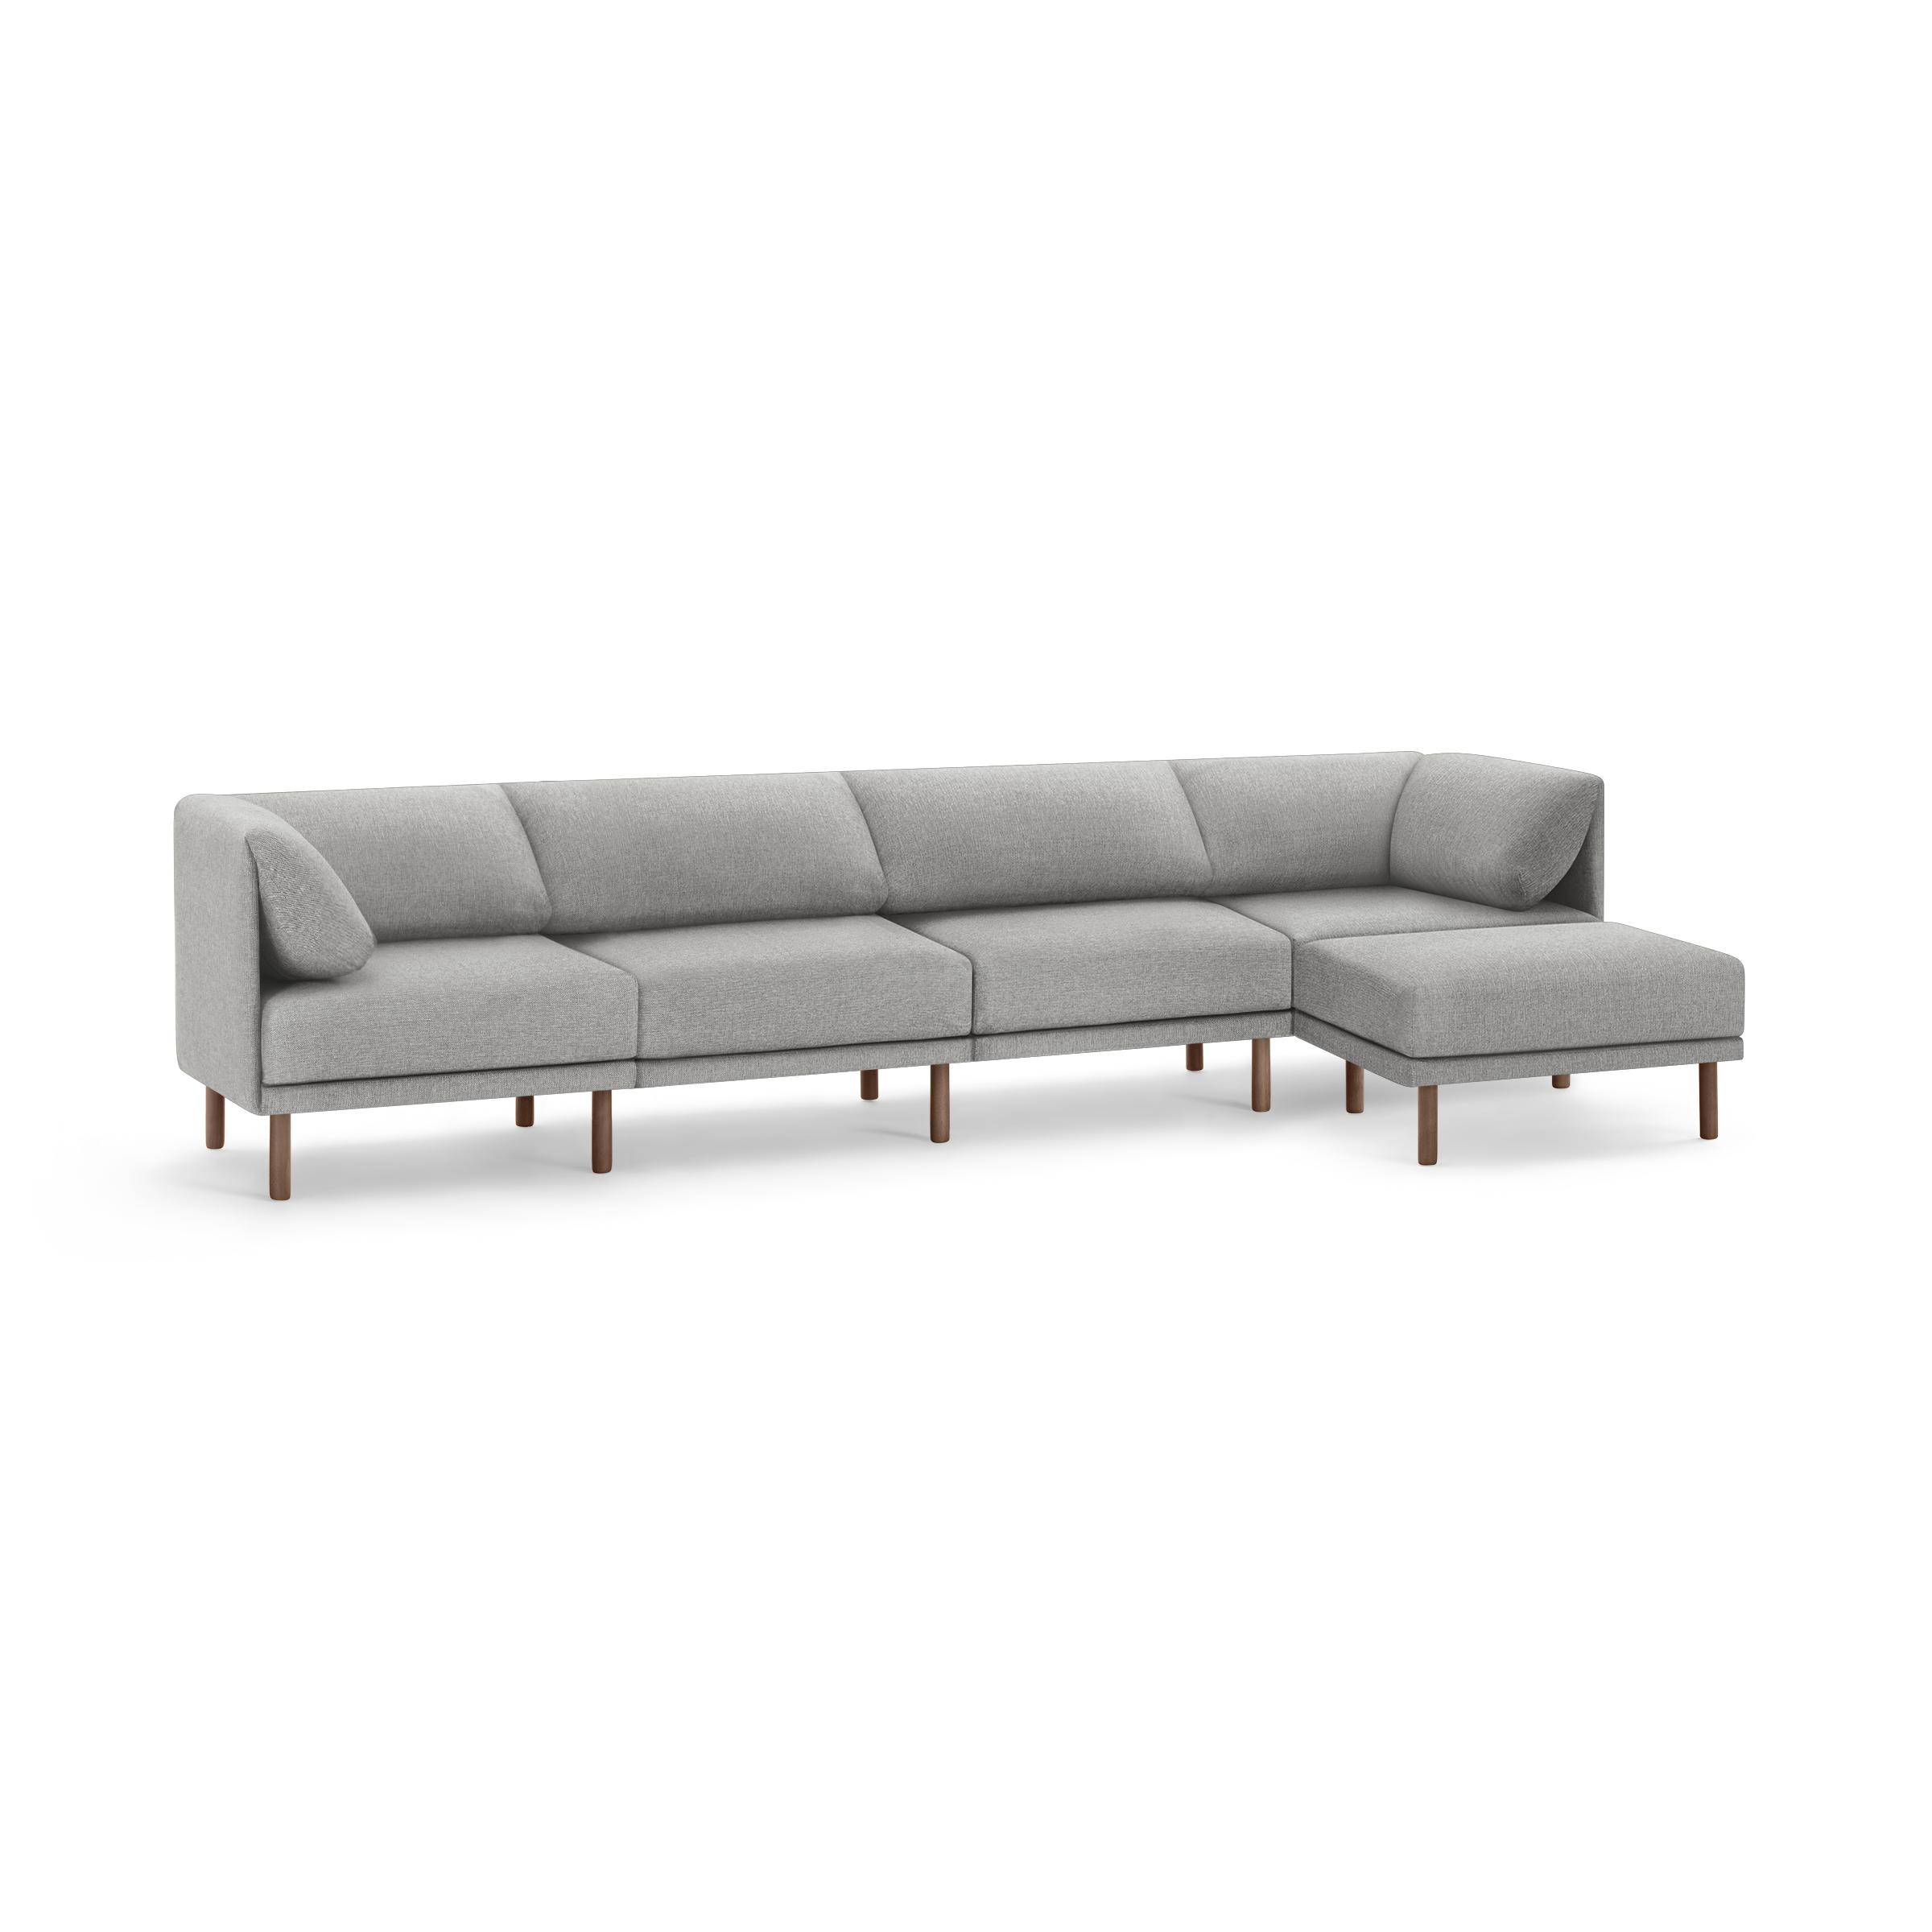 The Range 5-Piece Sectional Lounger in Stone Gray, Walnut Legs - Image 0